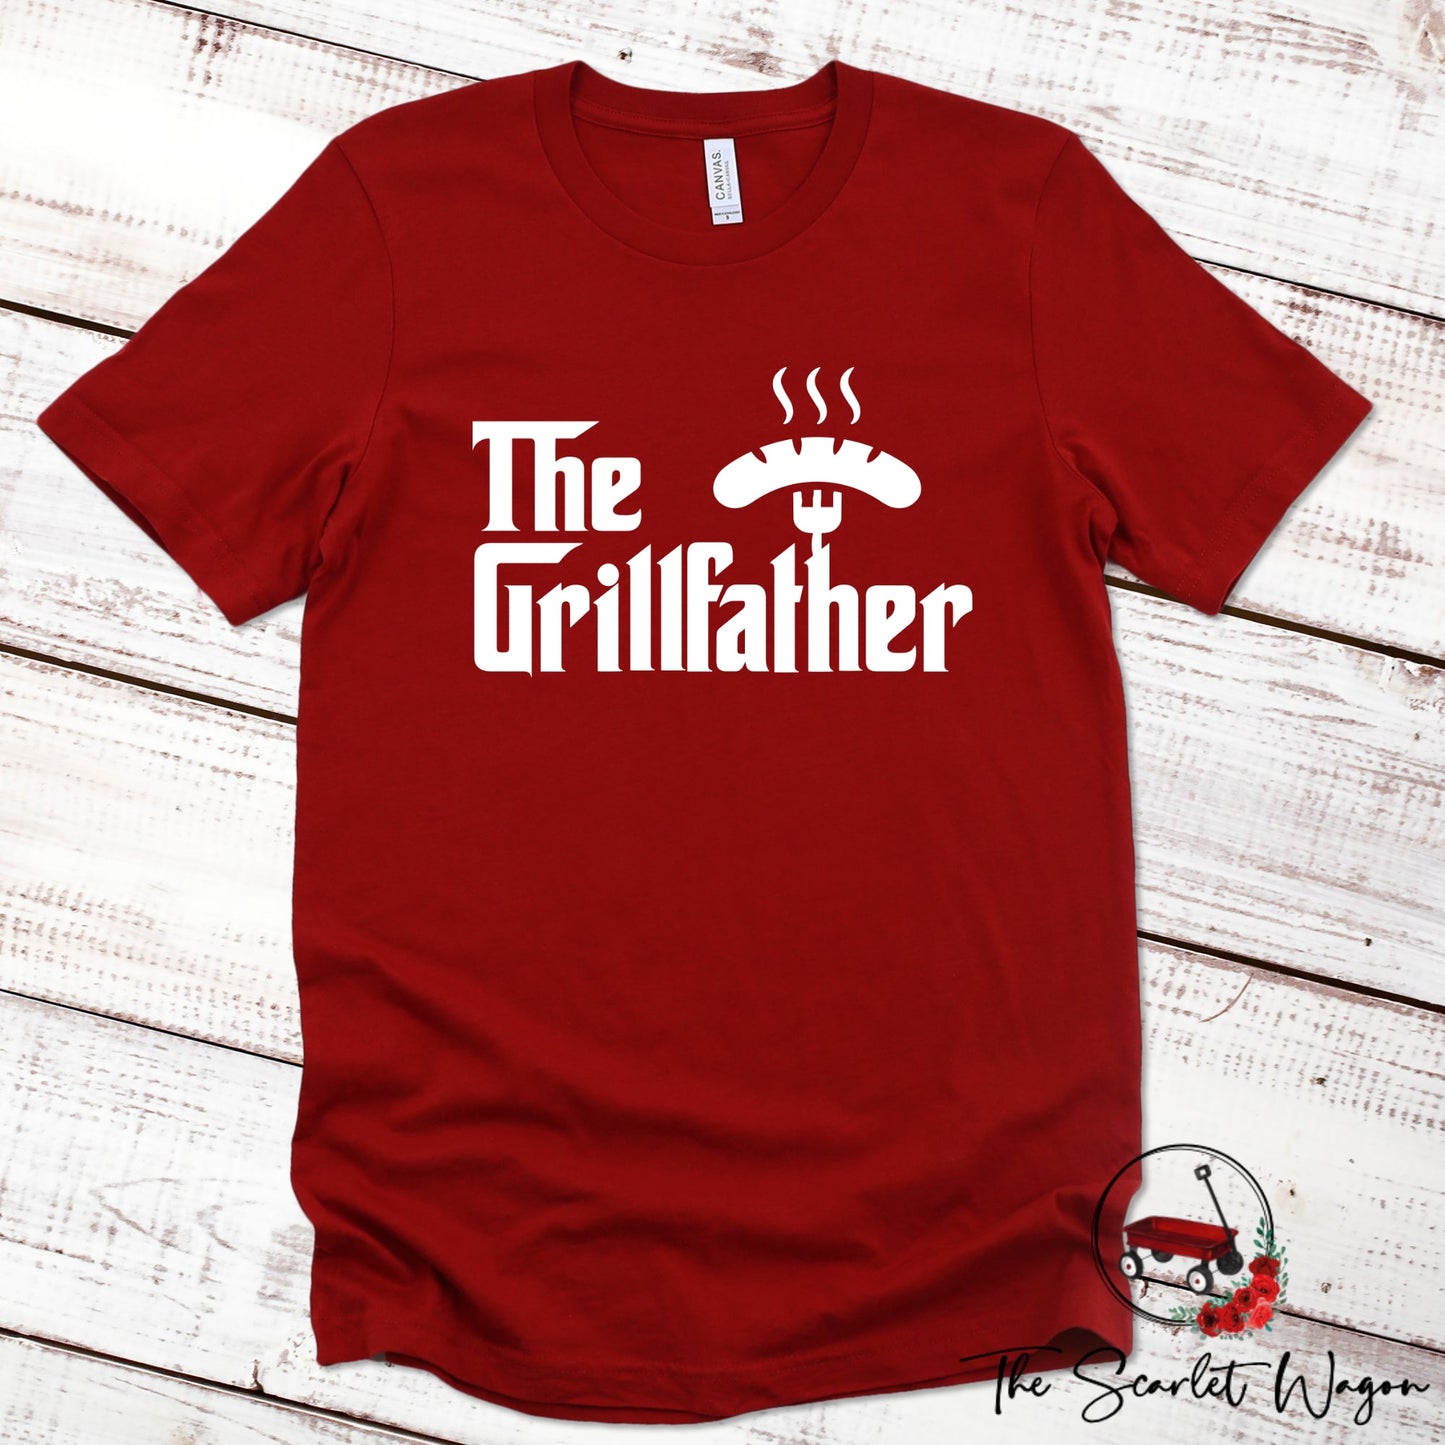 The Grillfather Premium Tee Scarlet Wagon Red XS 